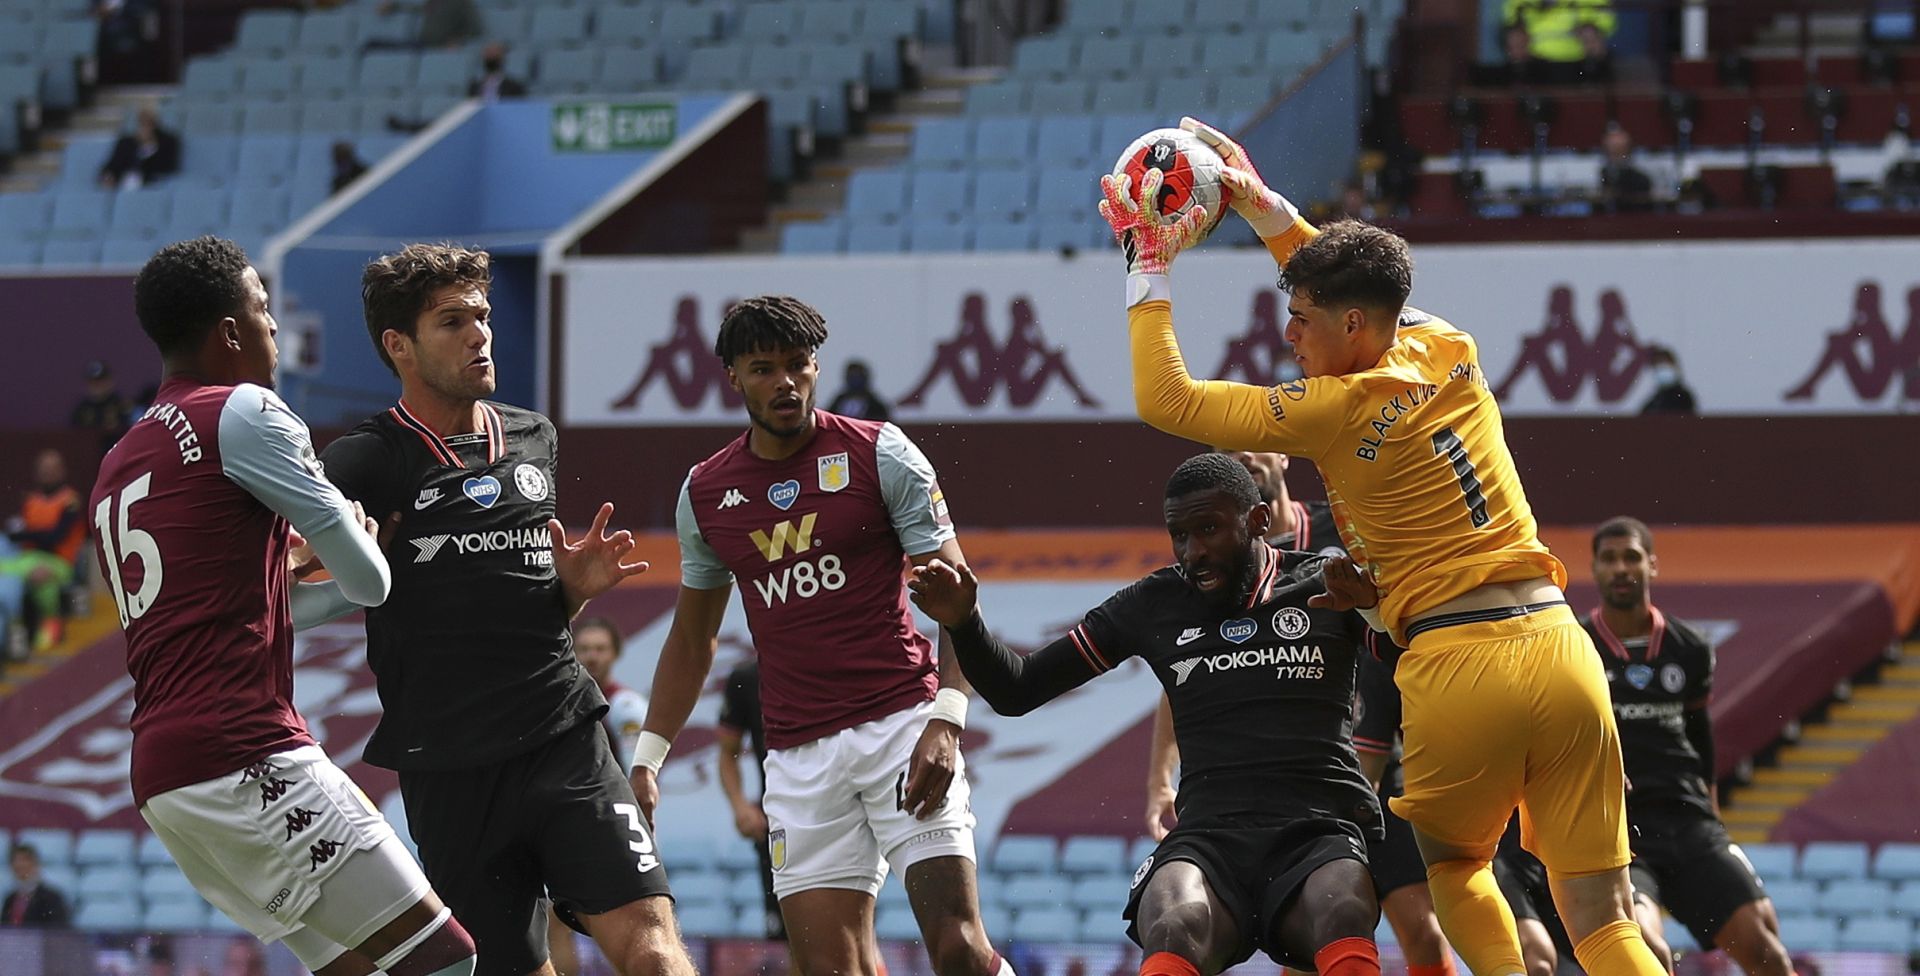 epa08500670 Chelsea goalkeeper Kepa Arrizabalaga (R) makes a save during the English Premier League soccer match between Aston Villa and Chelsea FC in Birmingham, Britain, 21 June 2020.  EPA/CATHERINE IVILL / NMC / GETTY IMAGES POOL EDITORIAL USE ONLY. No use with unauthorized audio, video, data, fixture lists, club/league logos or 'live' services. Online in-match use limited to 120 images, no video emulation. No use in betting, games or single club/league/player publications.